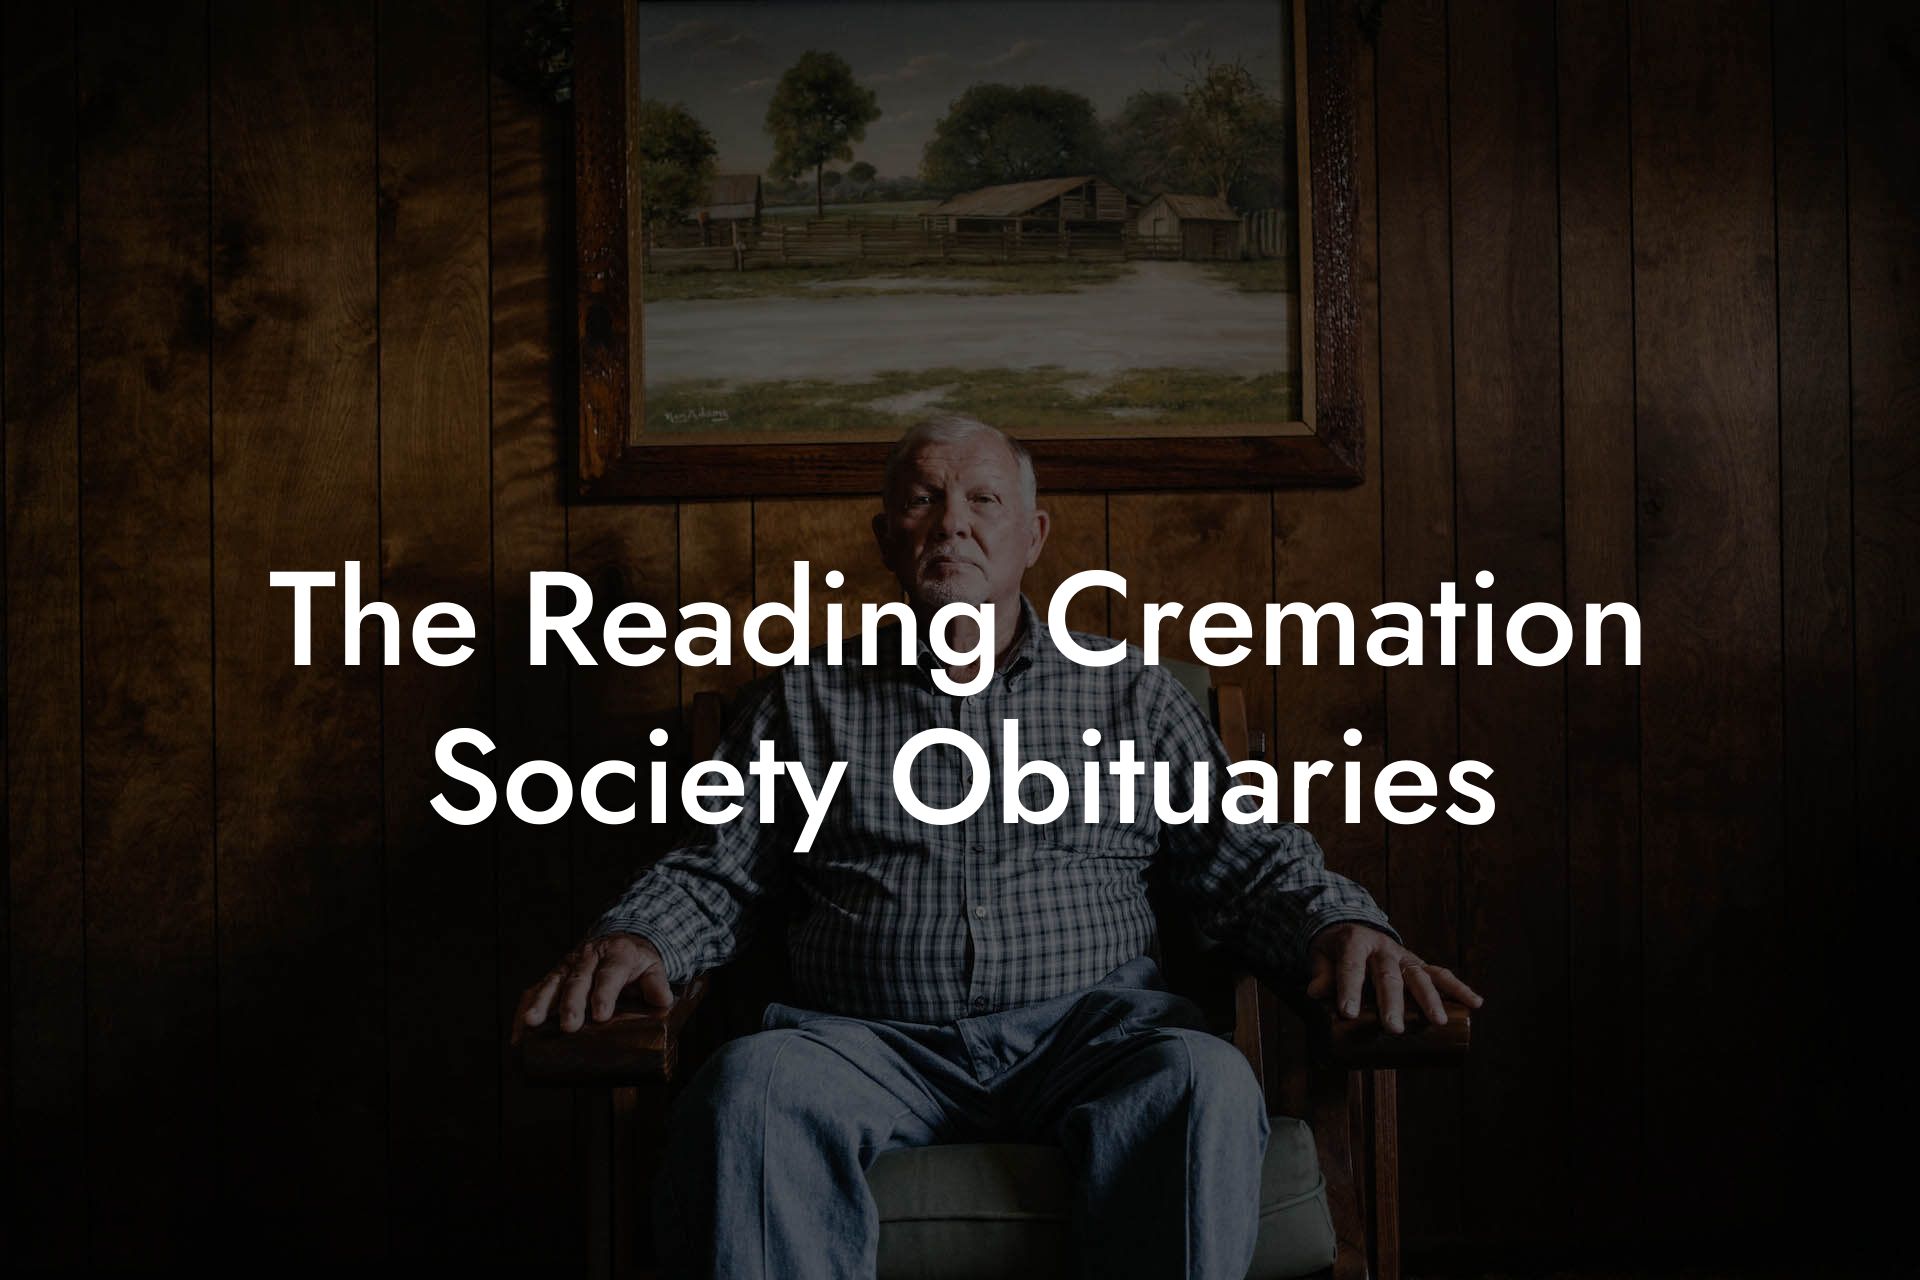 The Reading Cremation Society Obituaries